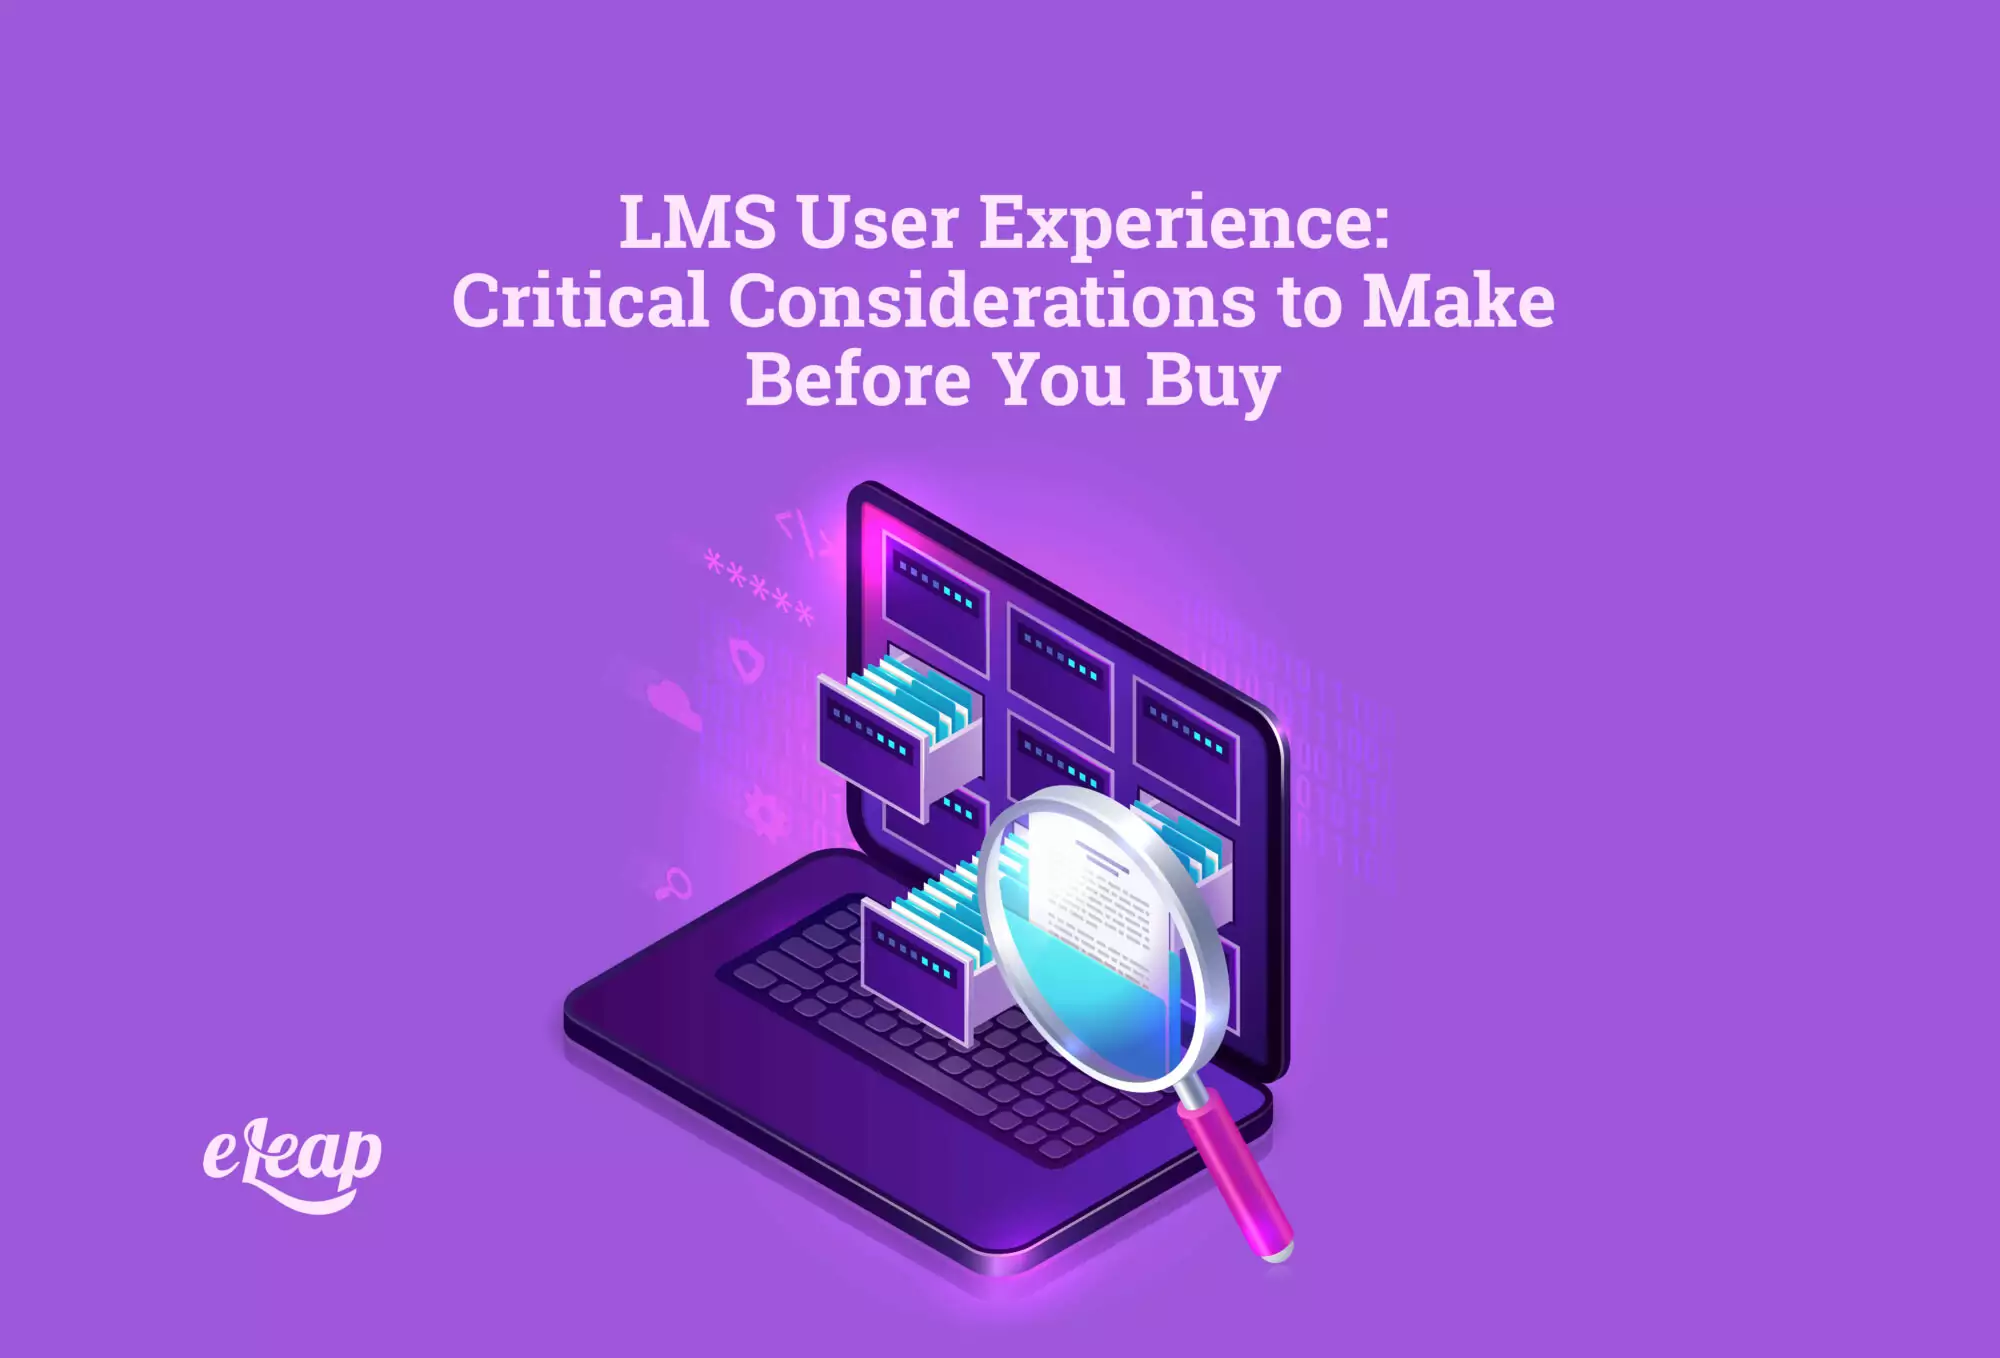 LMS User Experience: Critical Considerations to Make Before You Buy